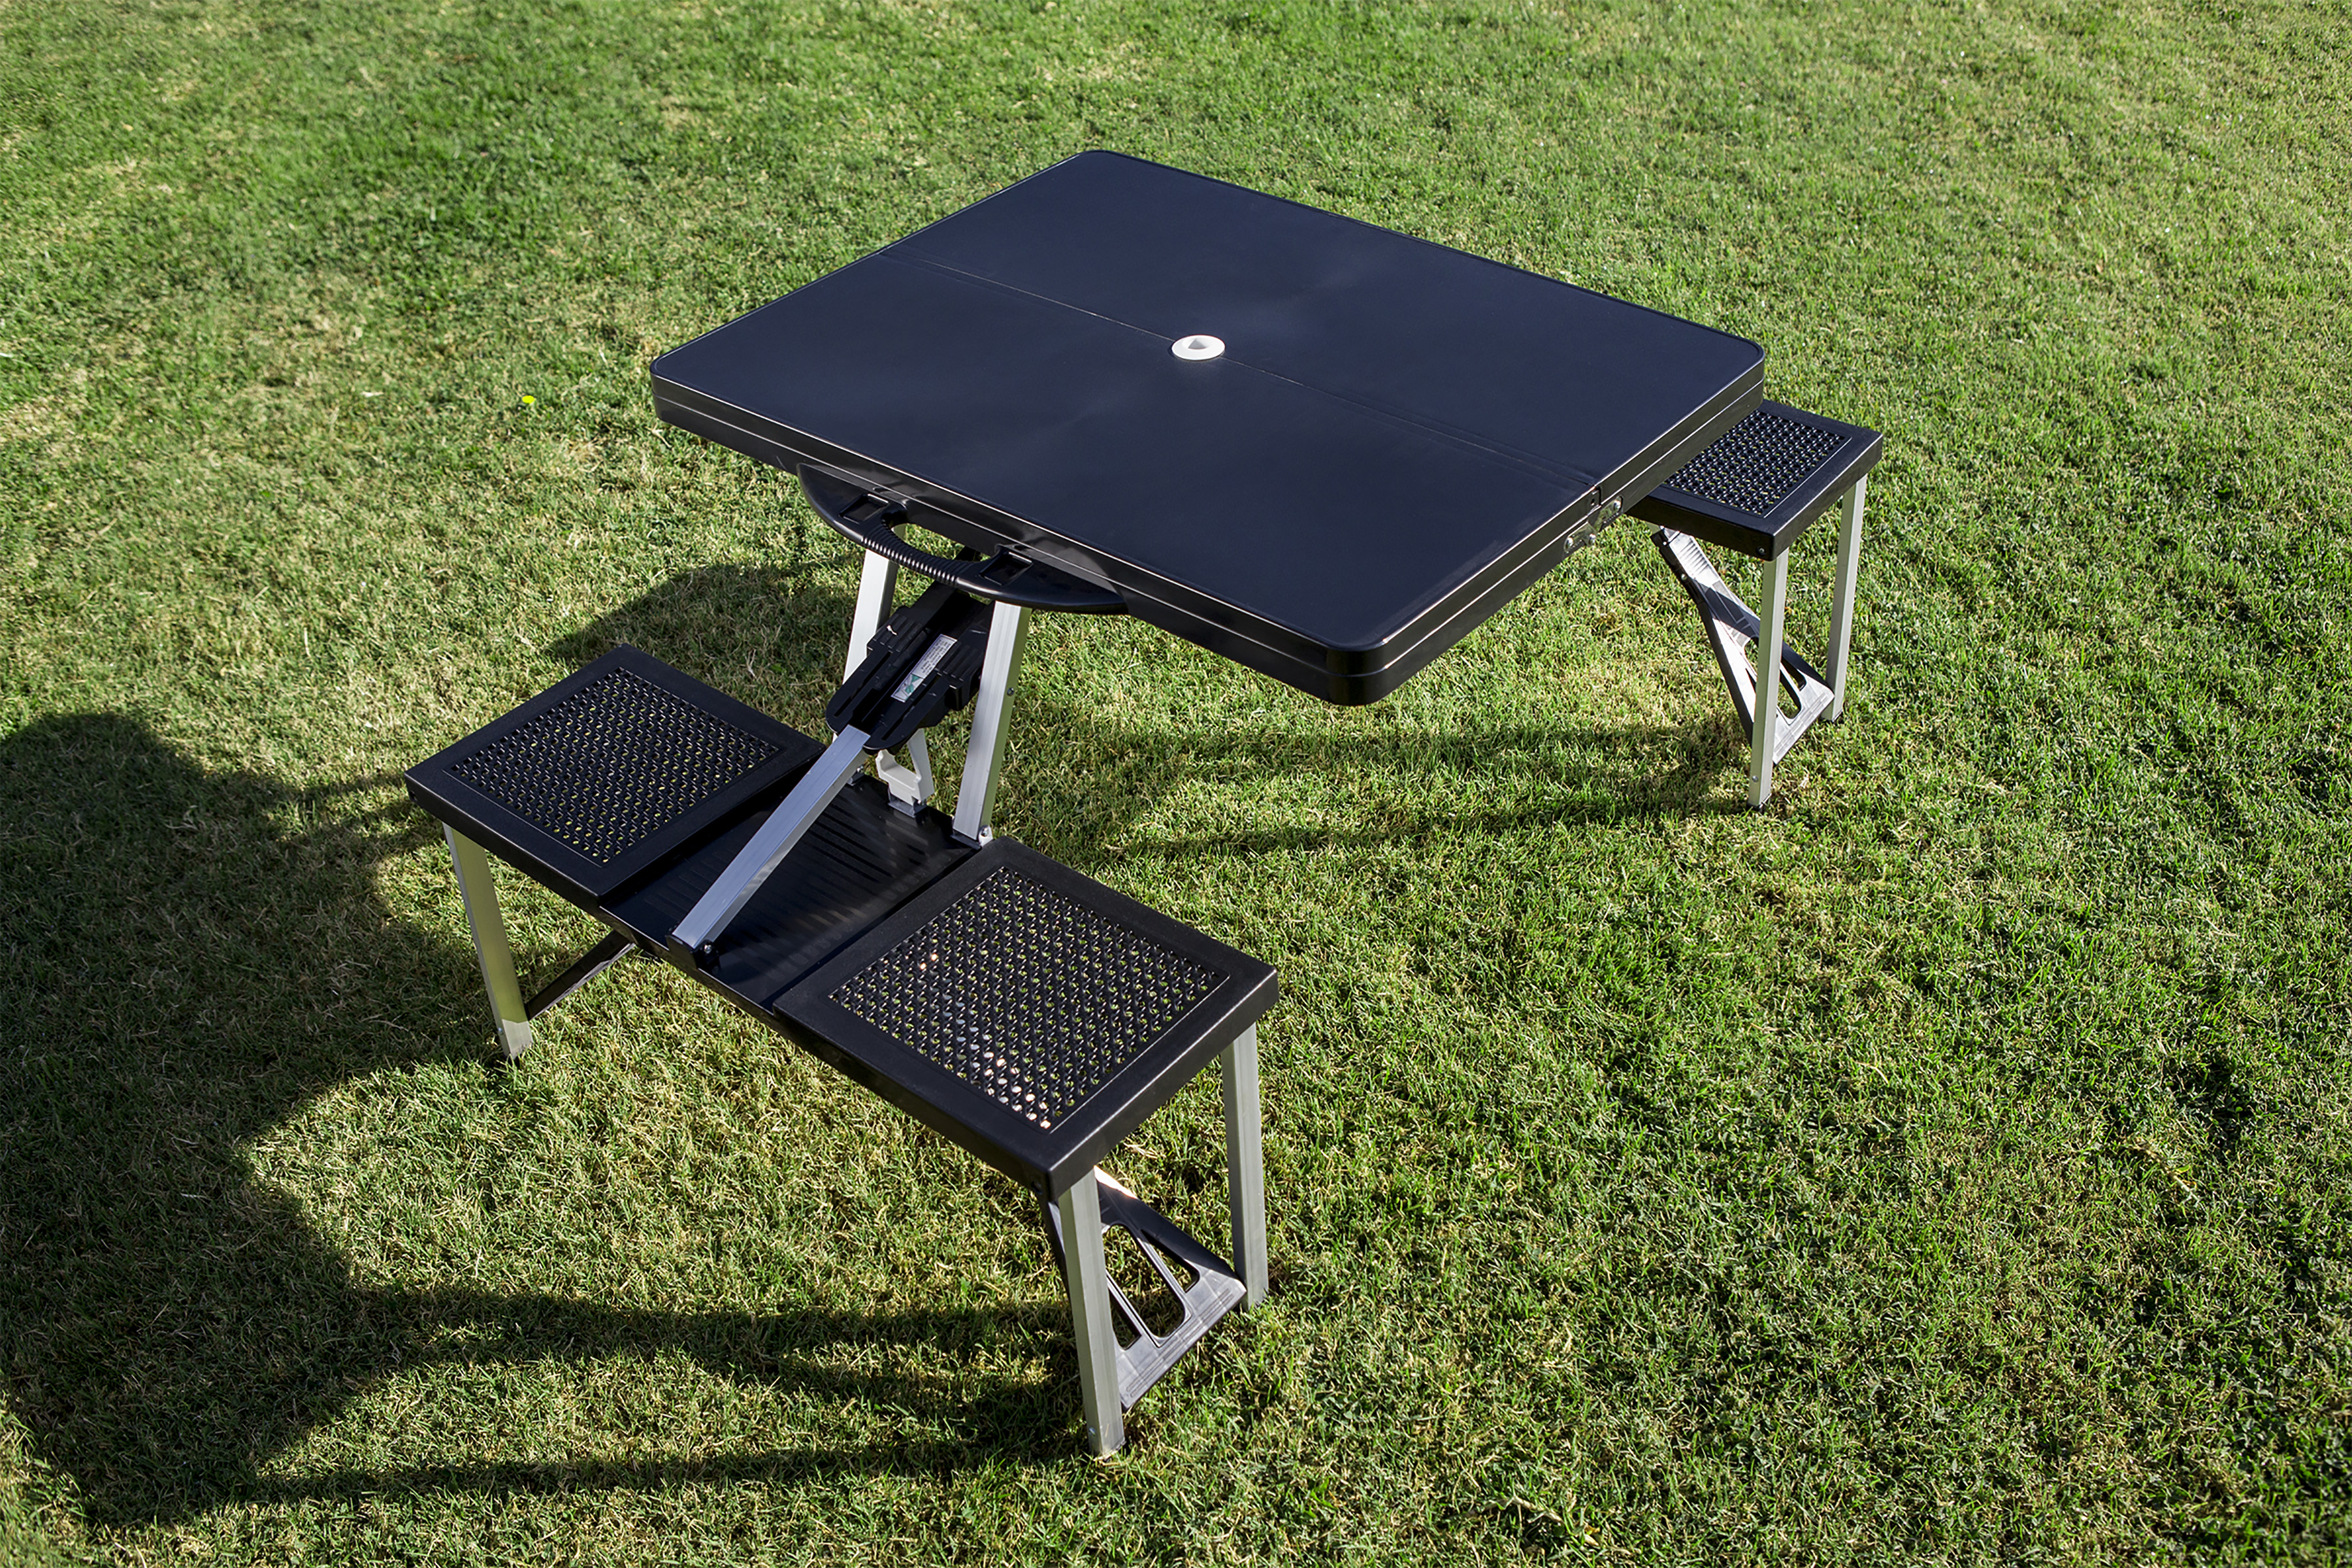 Football Field - Florida State Seminoles - Picnic Table Portable Folding Table with Seats